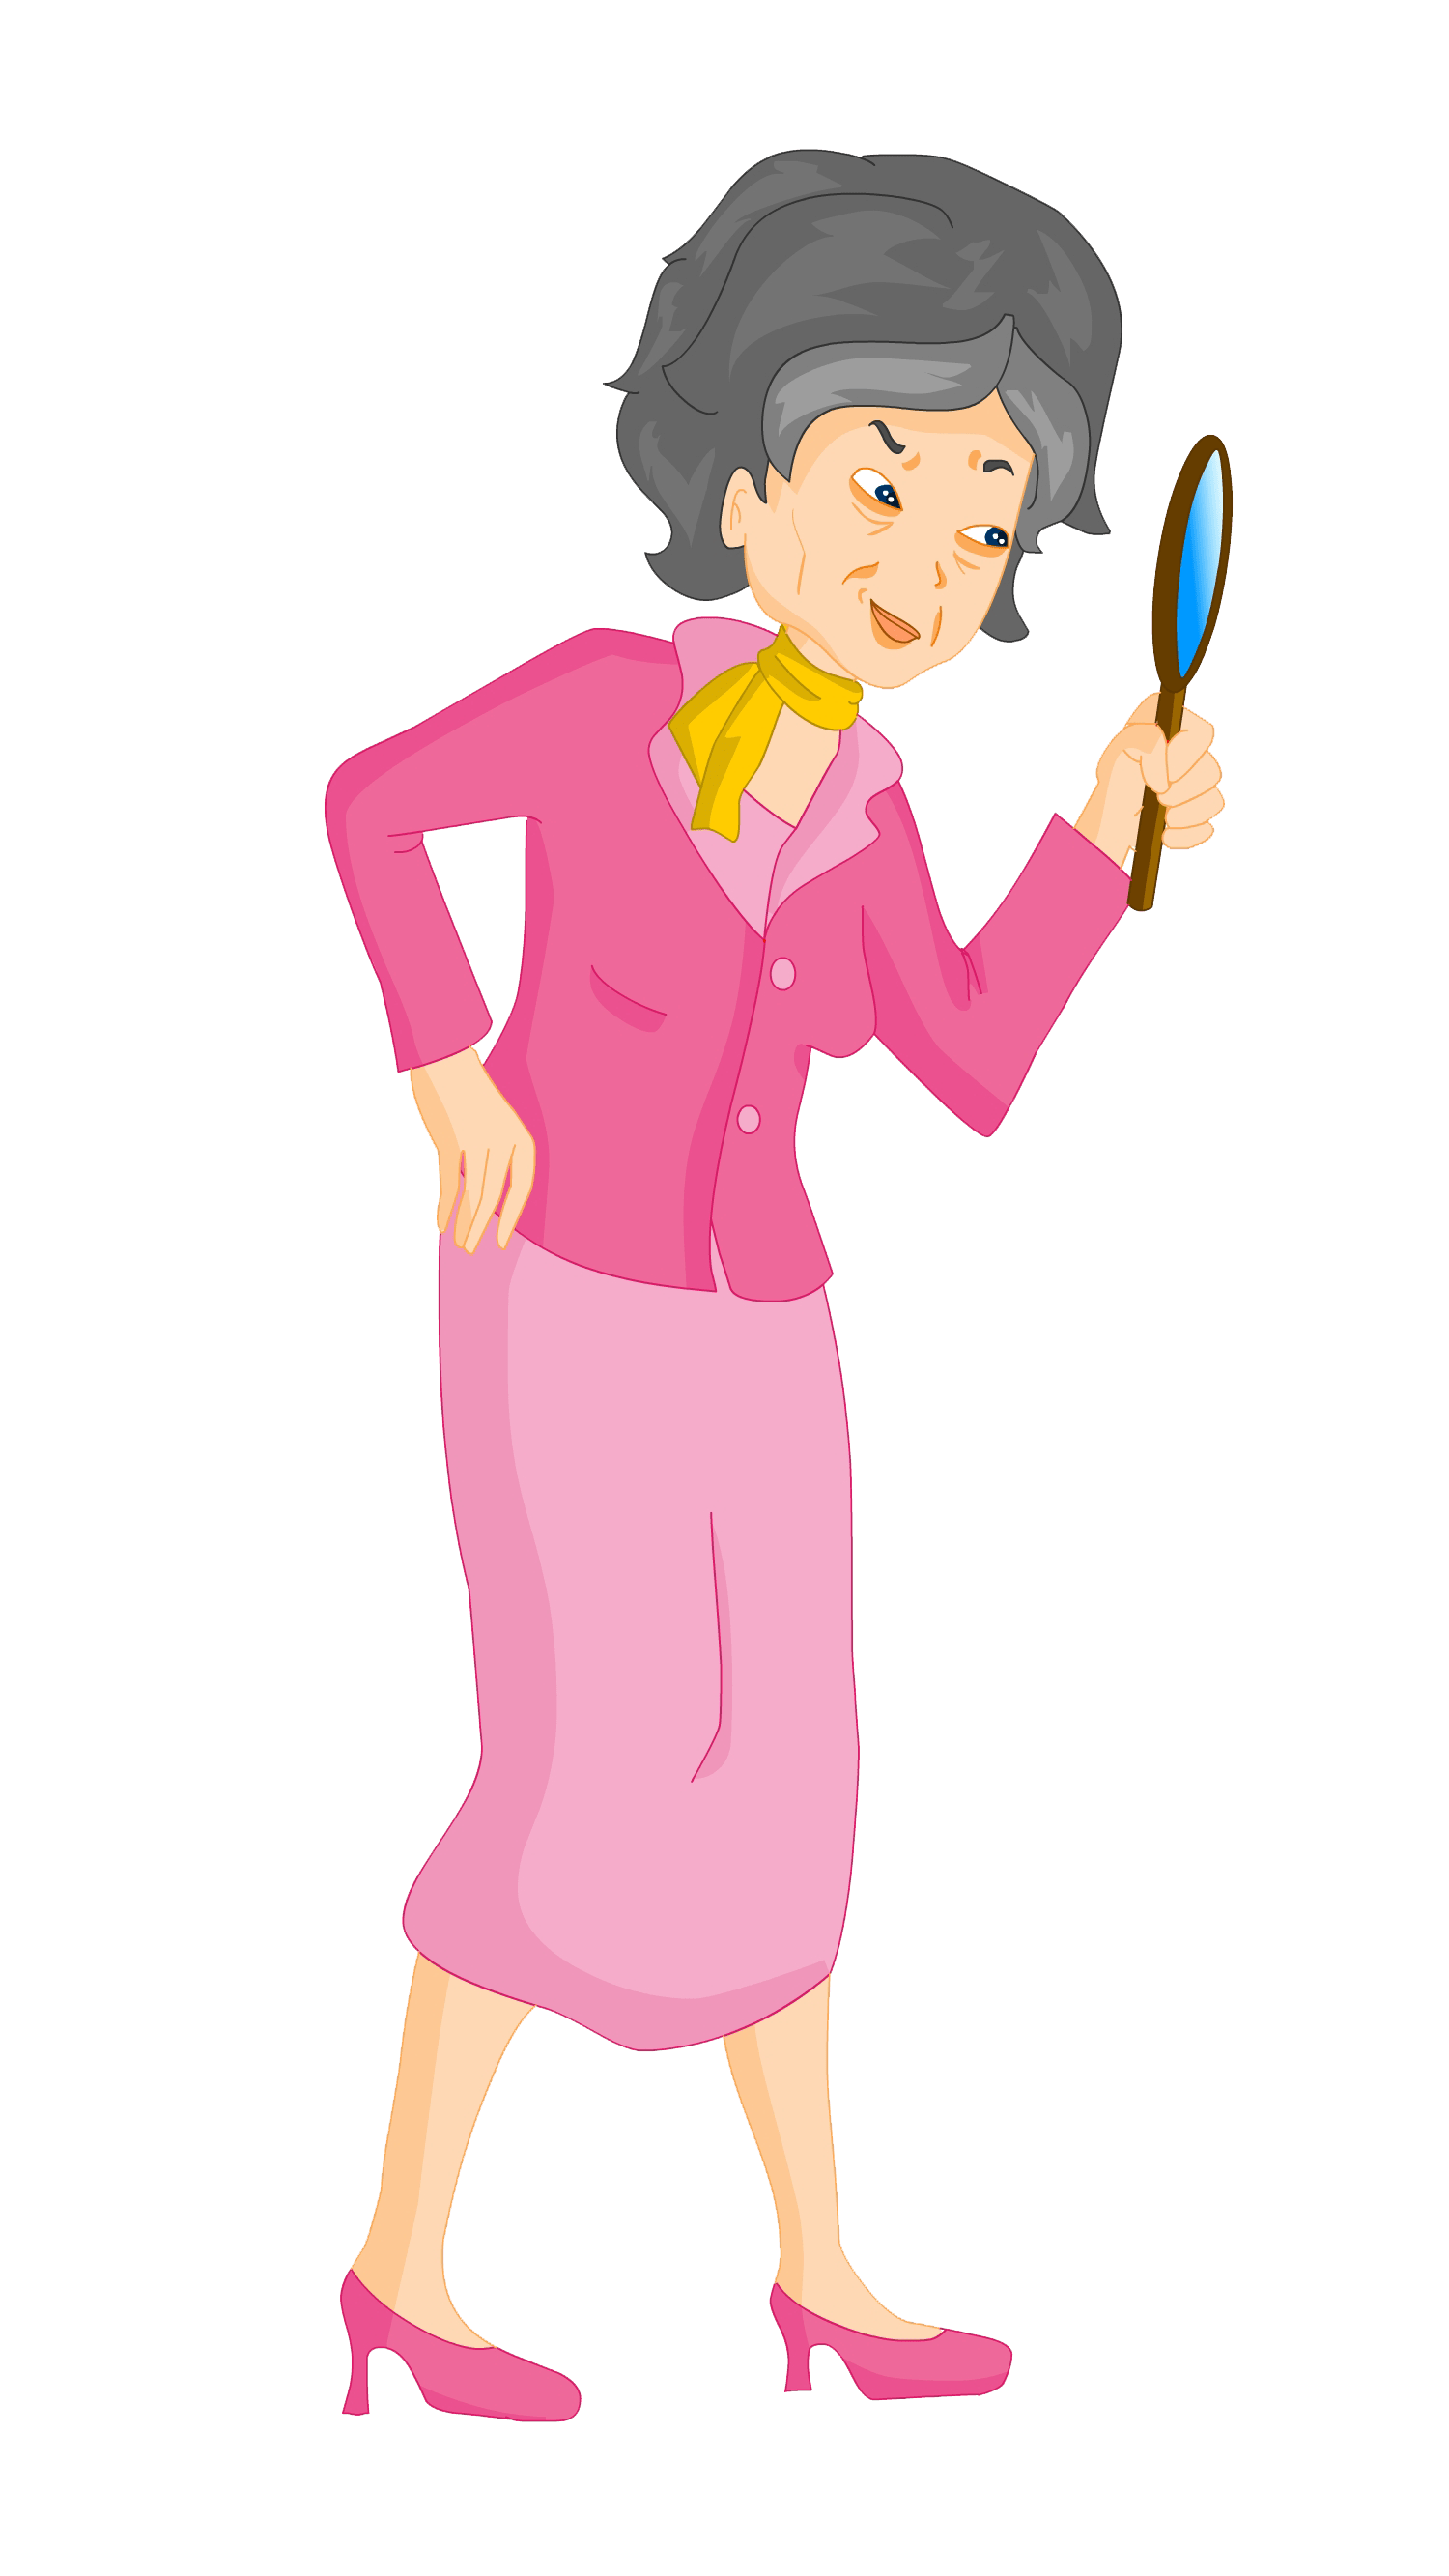 Detective clipart mystery story. Like cozy mysteries author